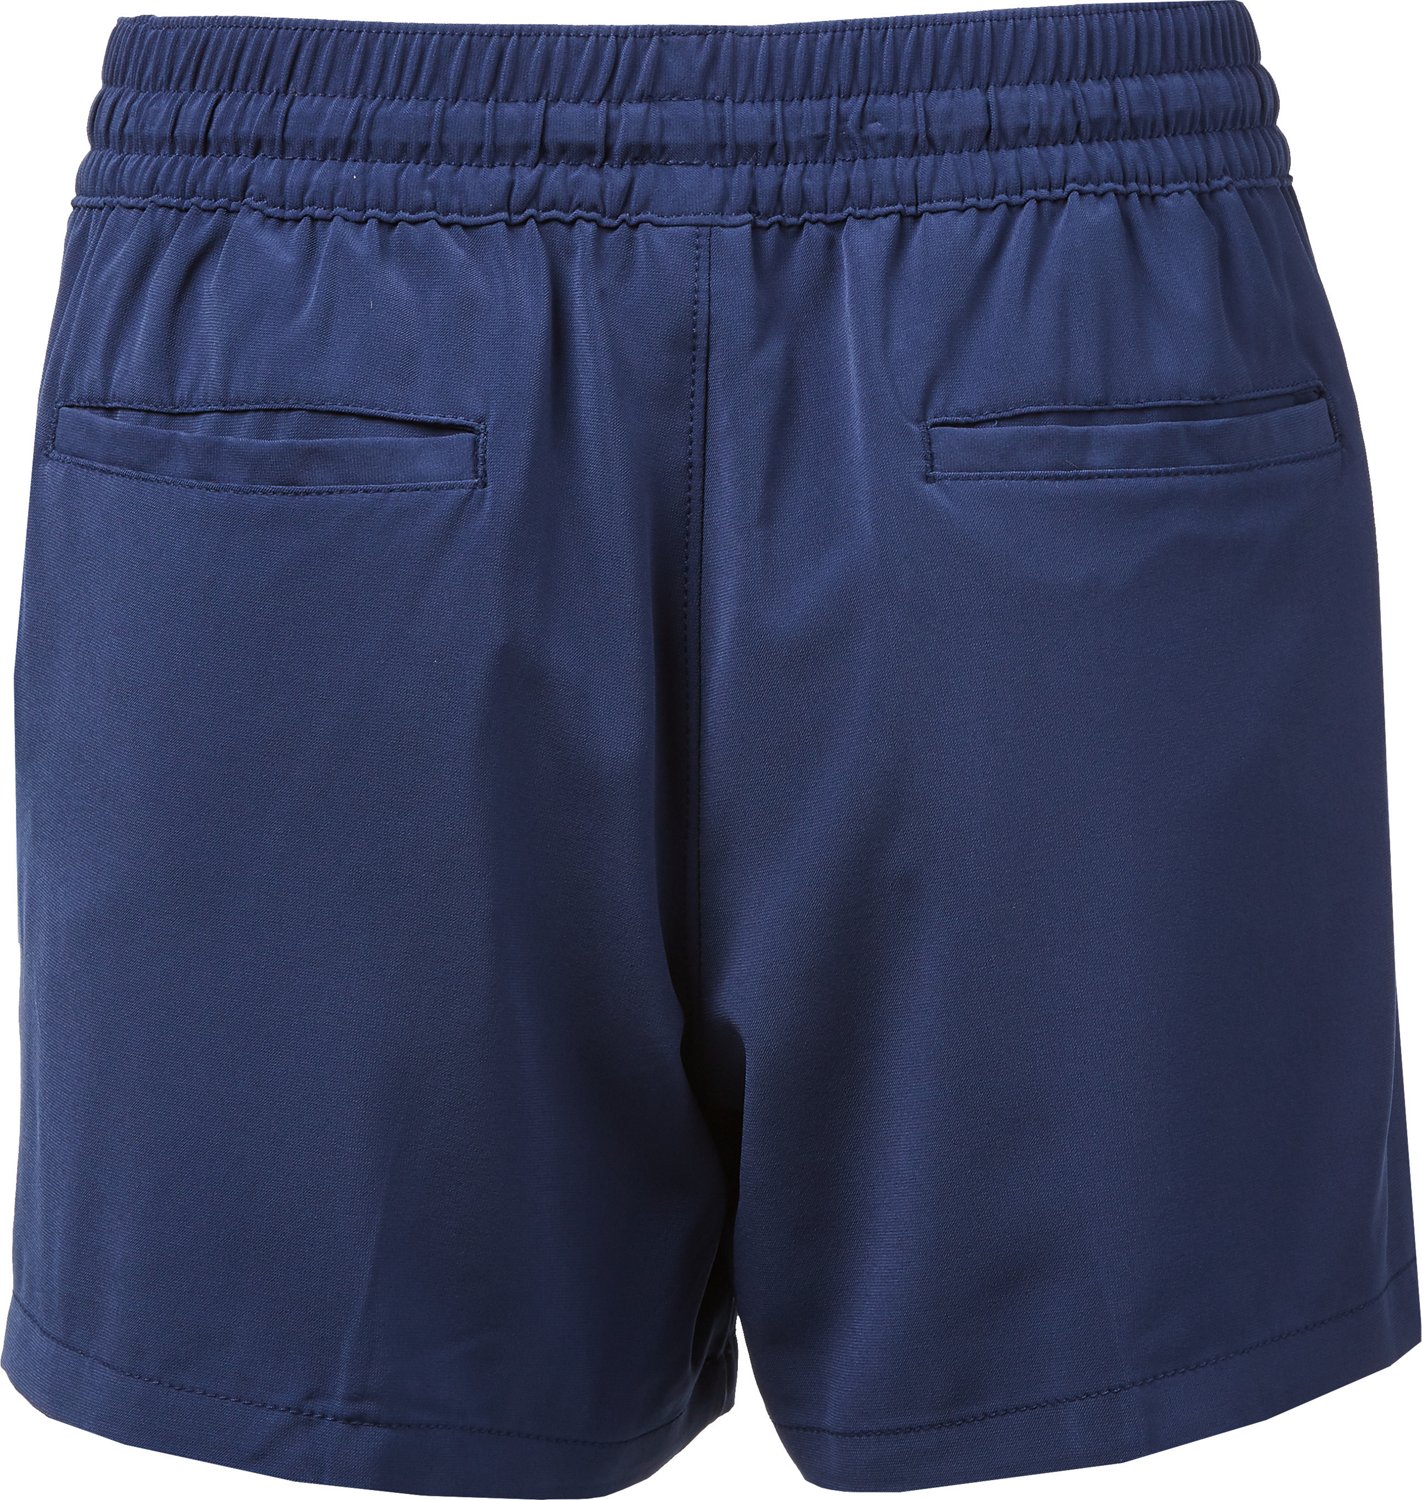 BCG Women's Lifestyle Cinched Waist Shorts | Academy